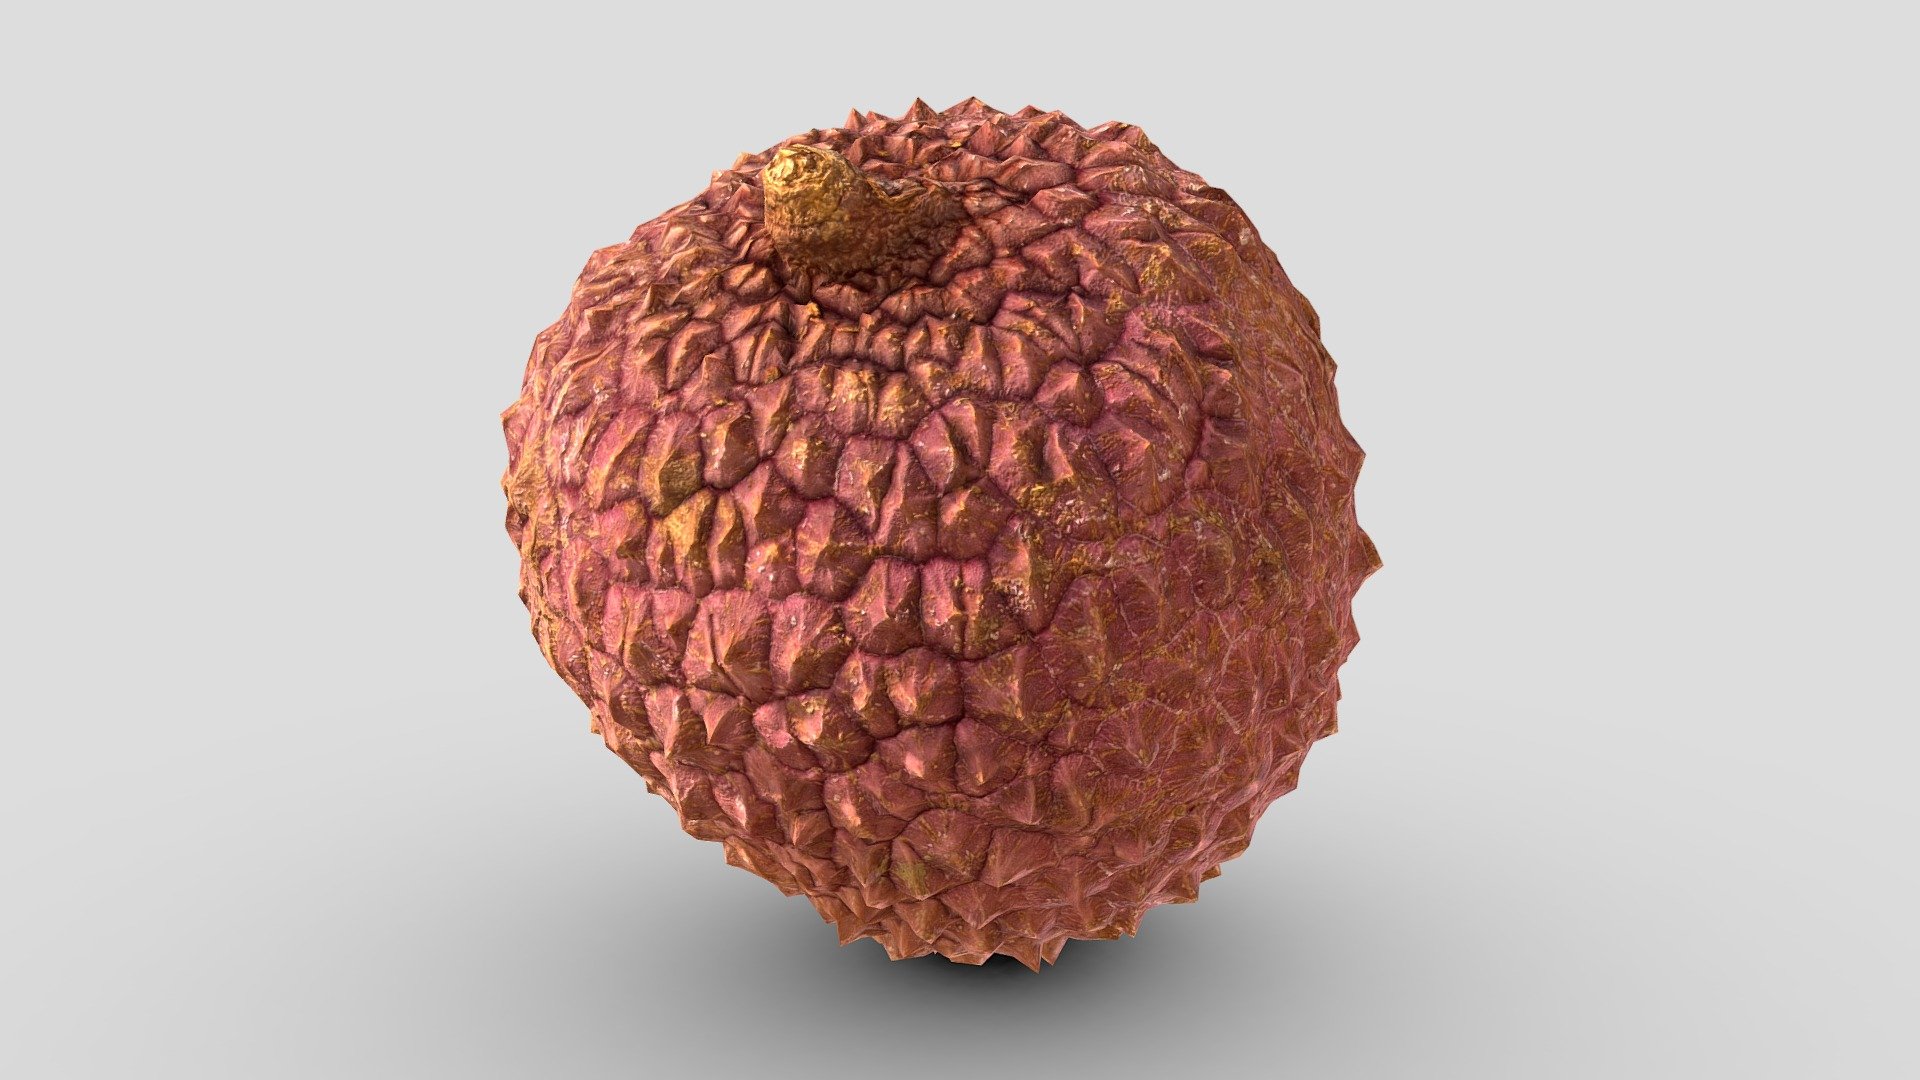 SCANNED LYCHEE
Photoscanned, retopologized and UV-remapped Lychee with baked 4K Textures.

REAL SCALE:
Width: 3.11cm / Length: 3.06cm / Height: 3.72cm


Raw scan has 1.058.894 polys
Retopologized down to 4.1k squares (8.2k polys)
Baked 4K Textures

Render Previews:


 - Lychee Scan 01 | Retopologized - Buy Royalty Free 3D model by Kai Moisch (@kaimoisch) 3d model